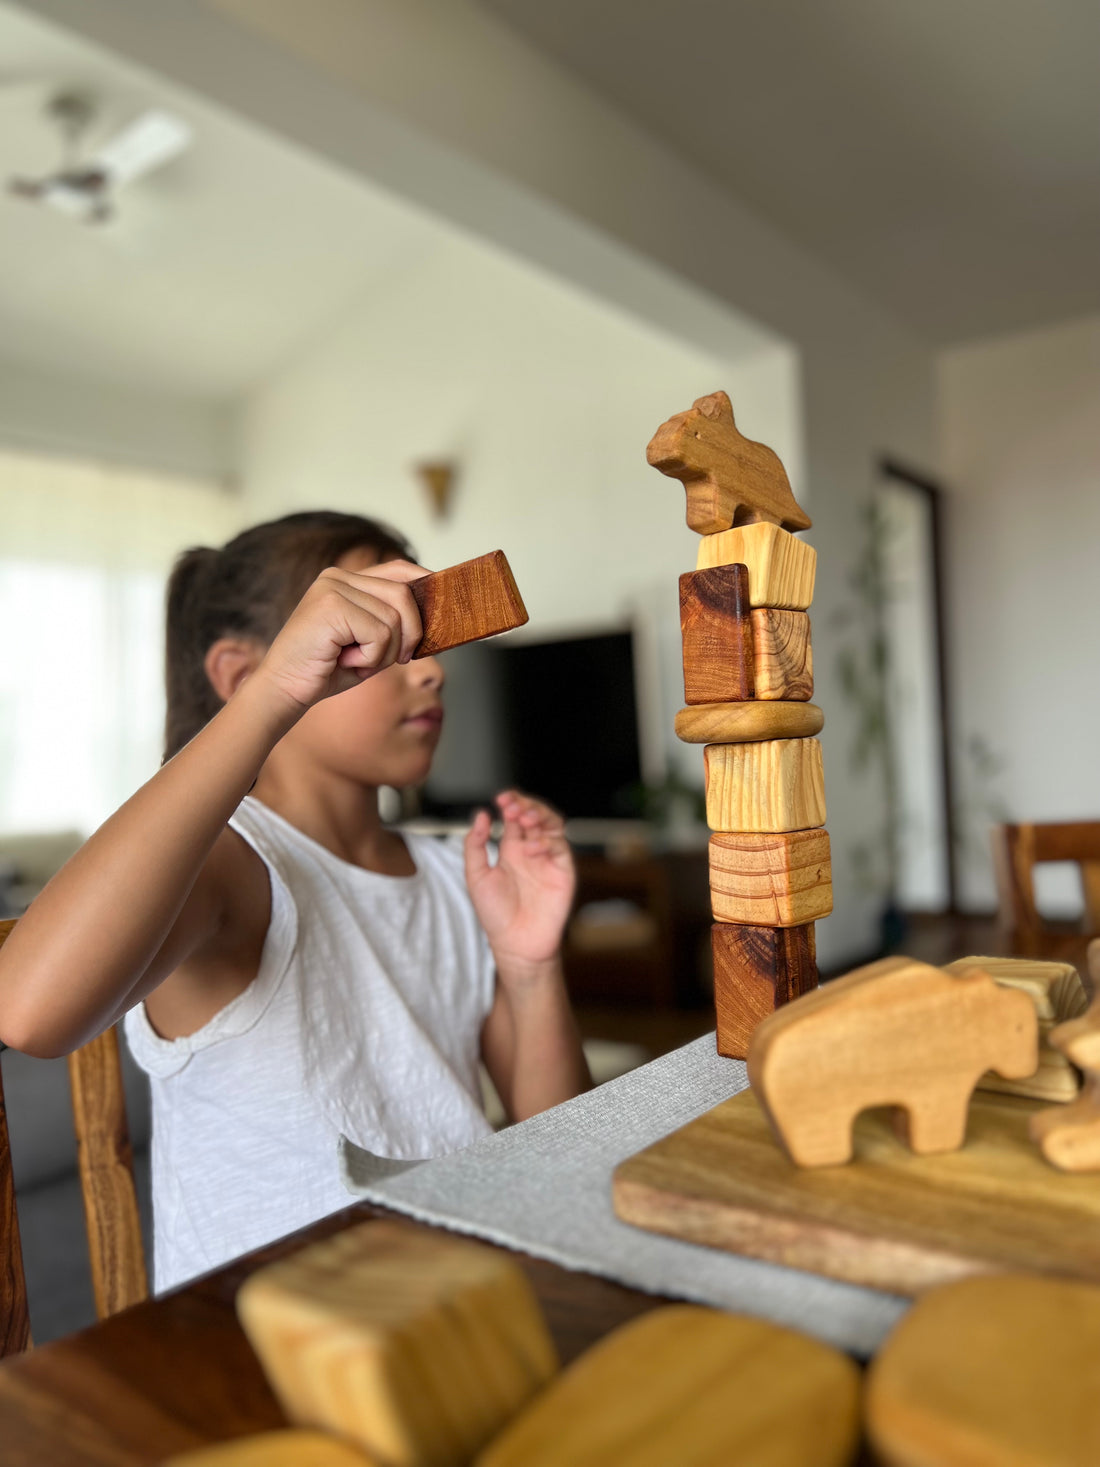 How to Troubleshoot Common Issues with Wooden Toys